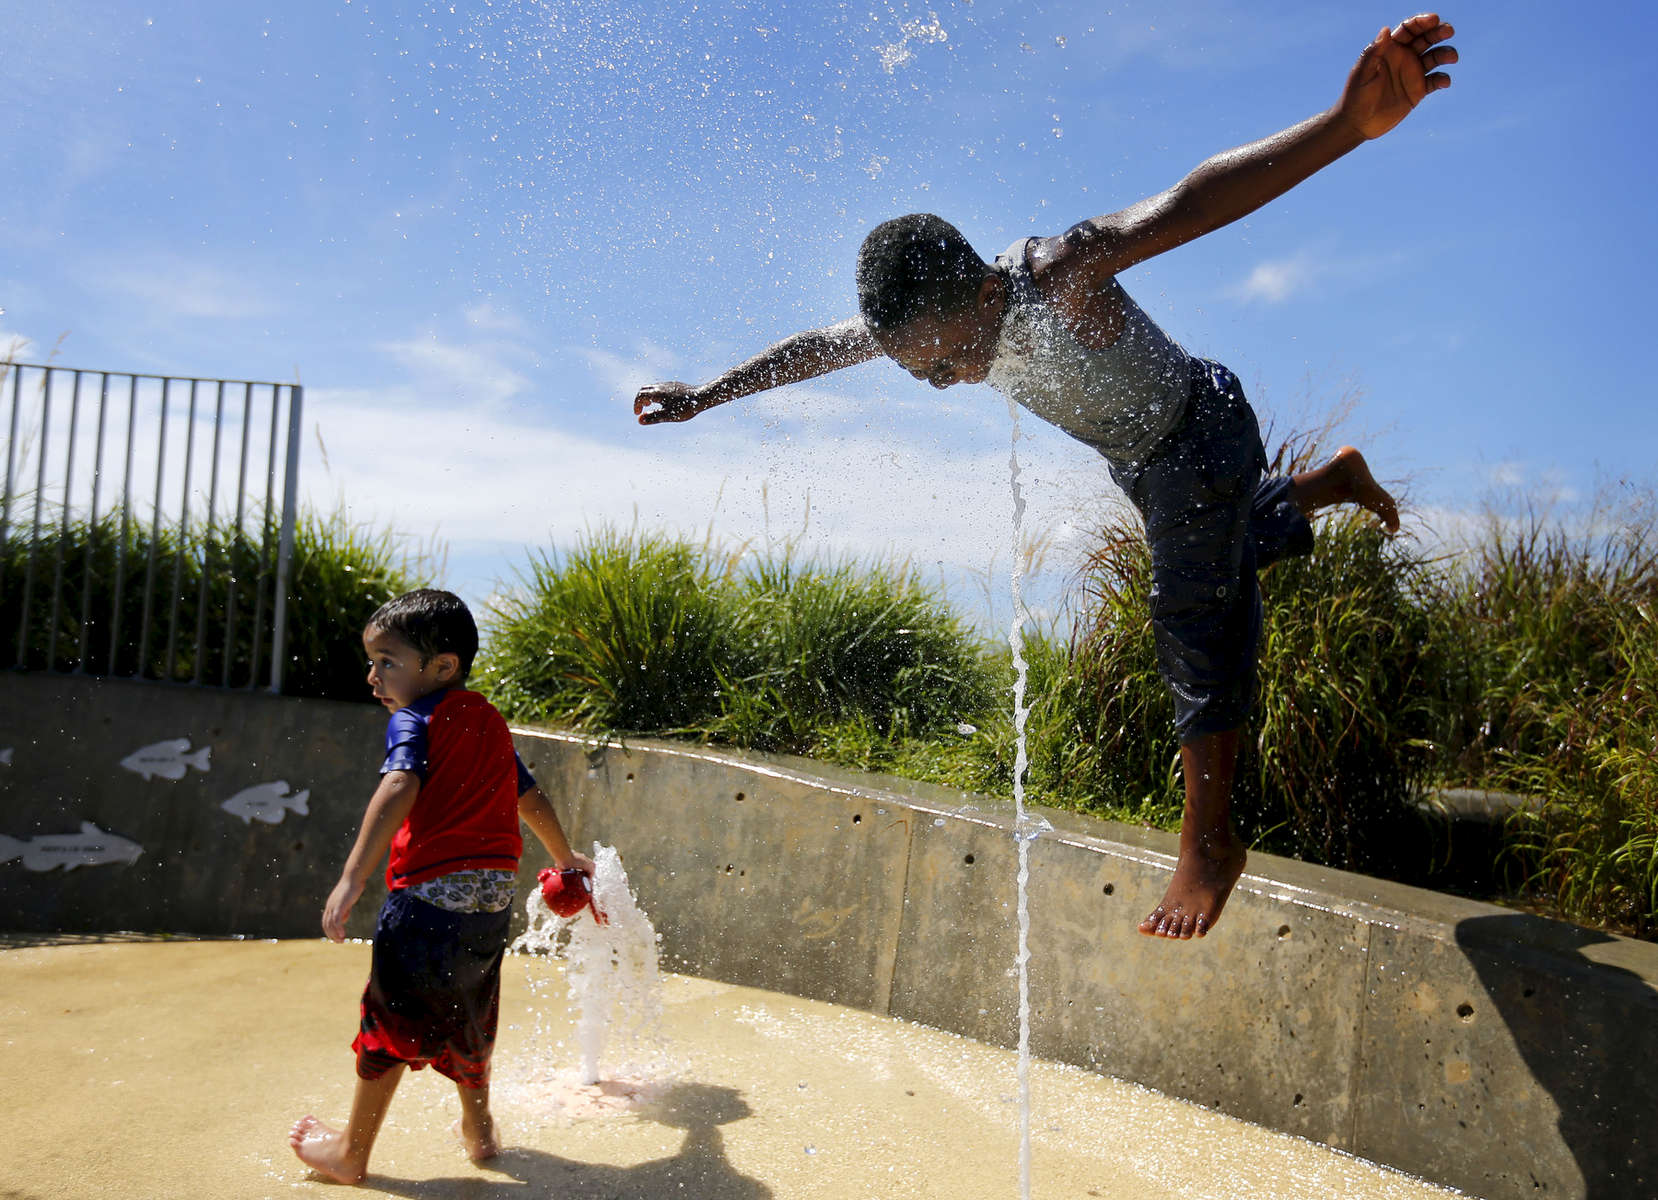 July 14, 2016 - Jahcquezz Payton (right), 8, lunges into a blast of water while Matthew Guevara, 3, soaks his stuffed animal while keeping cool in the water on Island Play at Beale Street Landing. (Mike Brown/The Commercial Appeal)